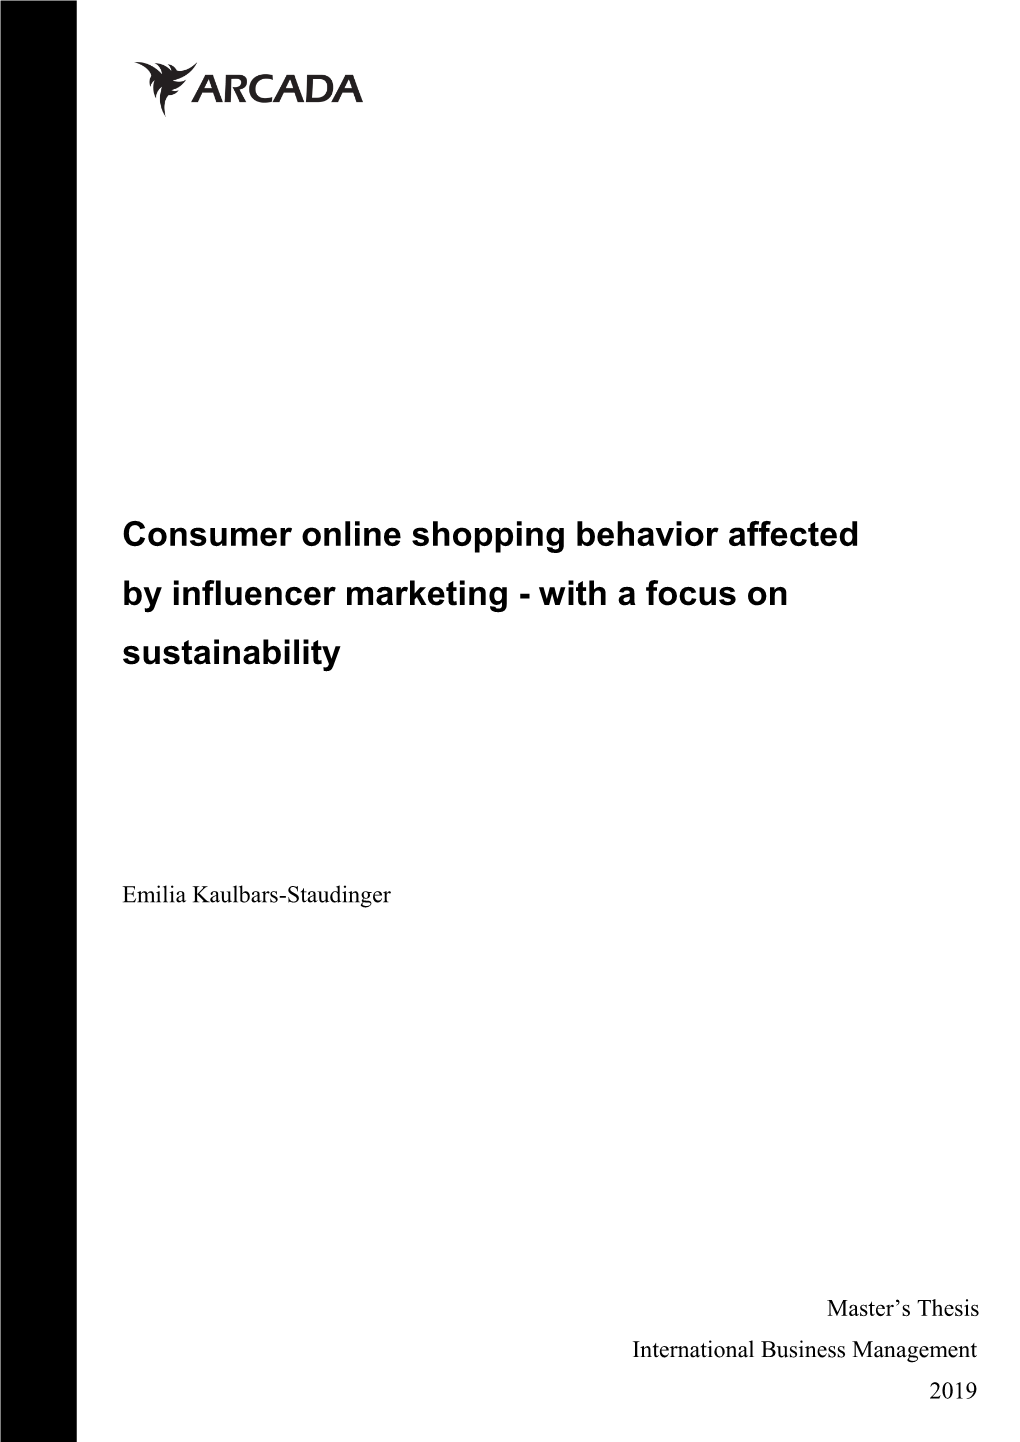 Consumer Online Shopping Behavior Affected by Influencer Marketing - with a Focus on Sustainability